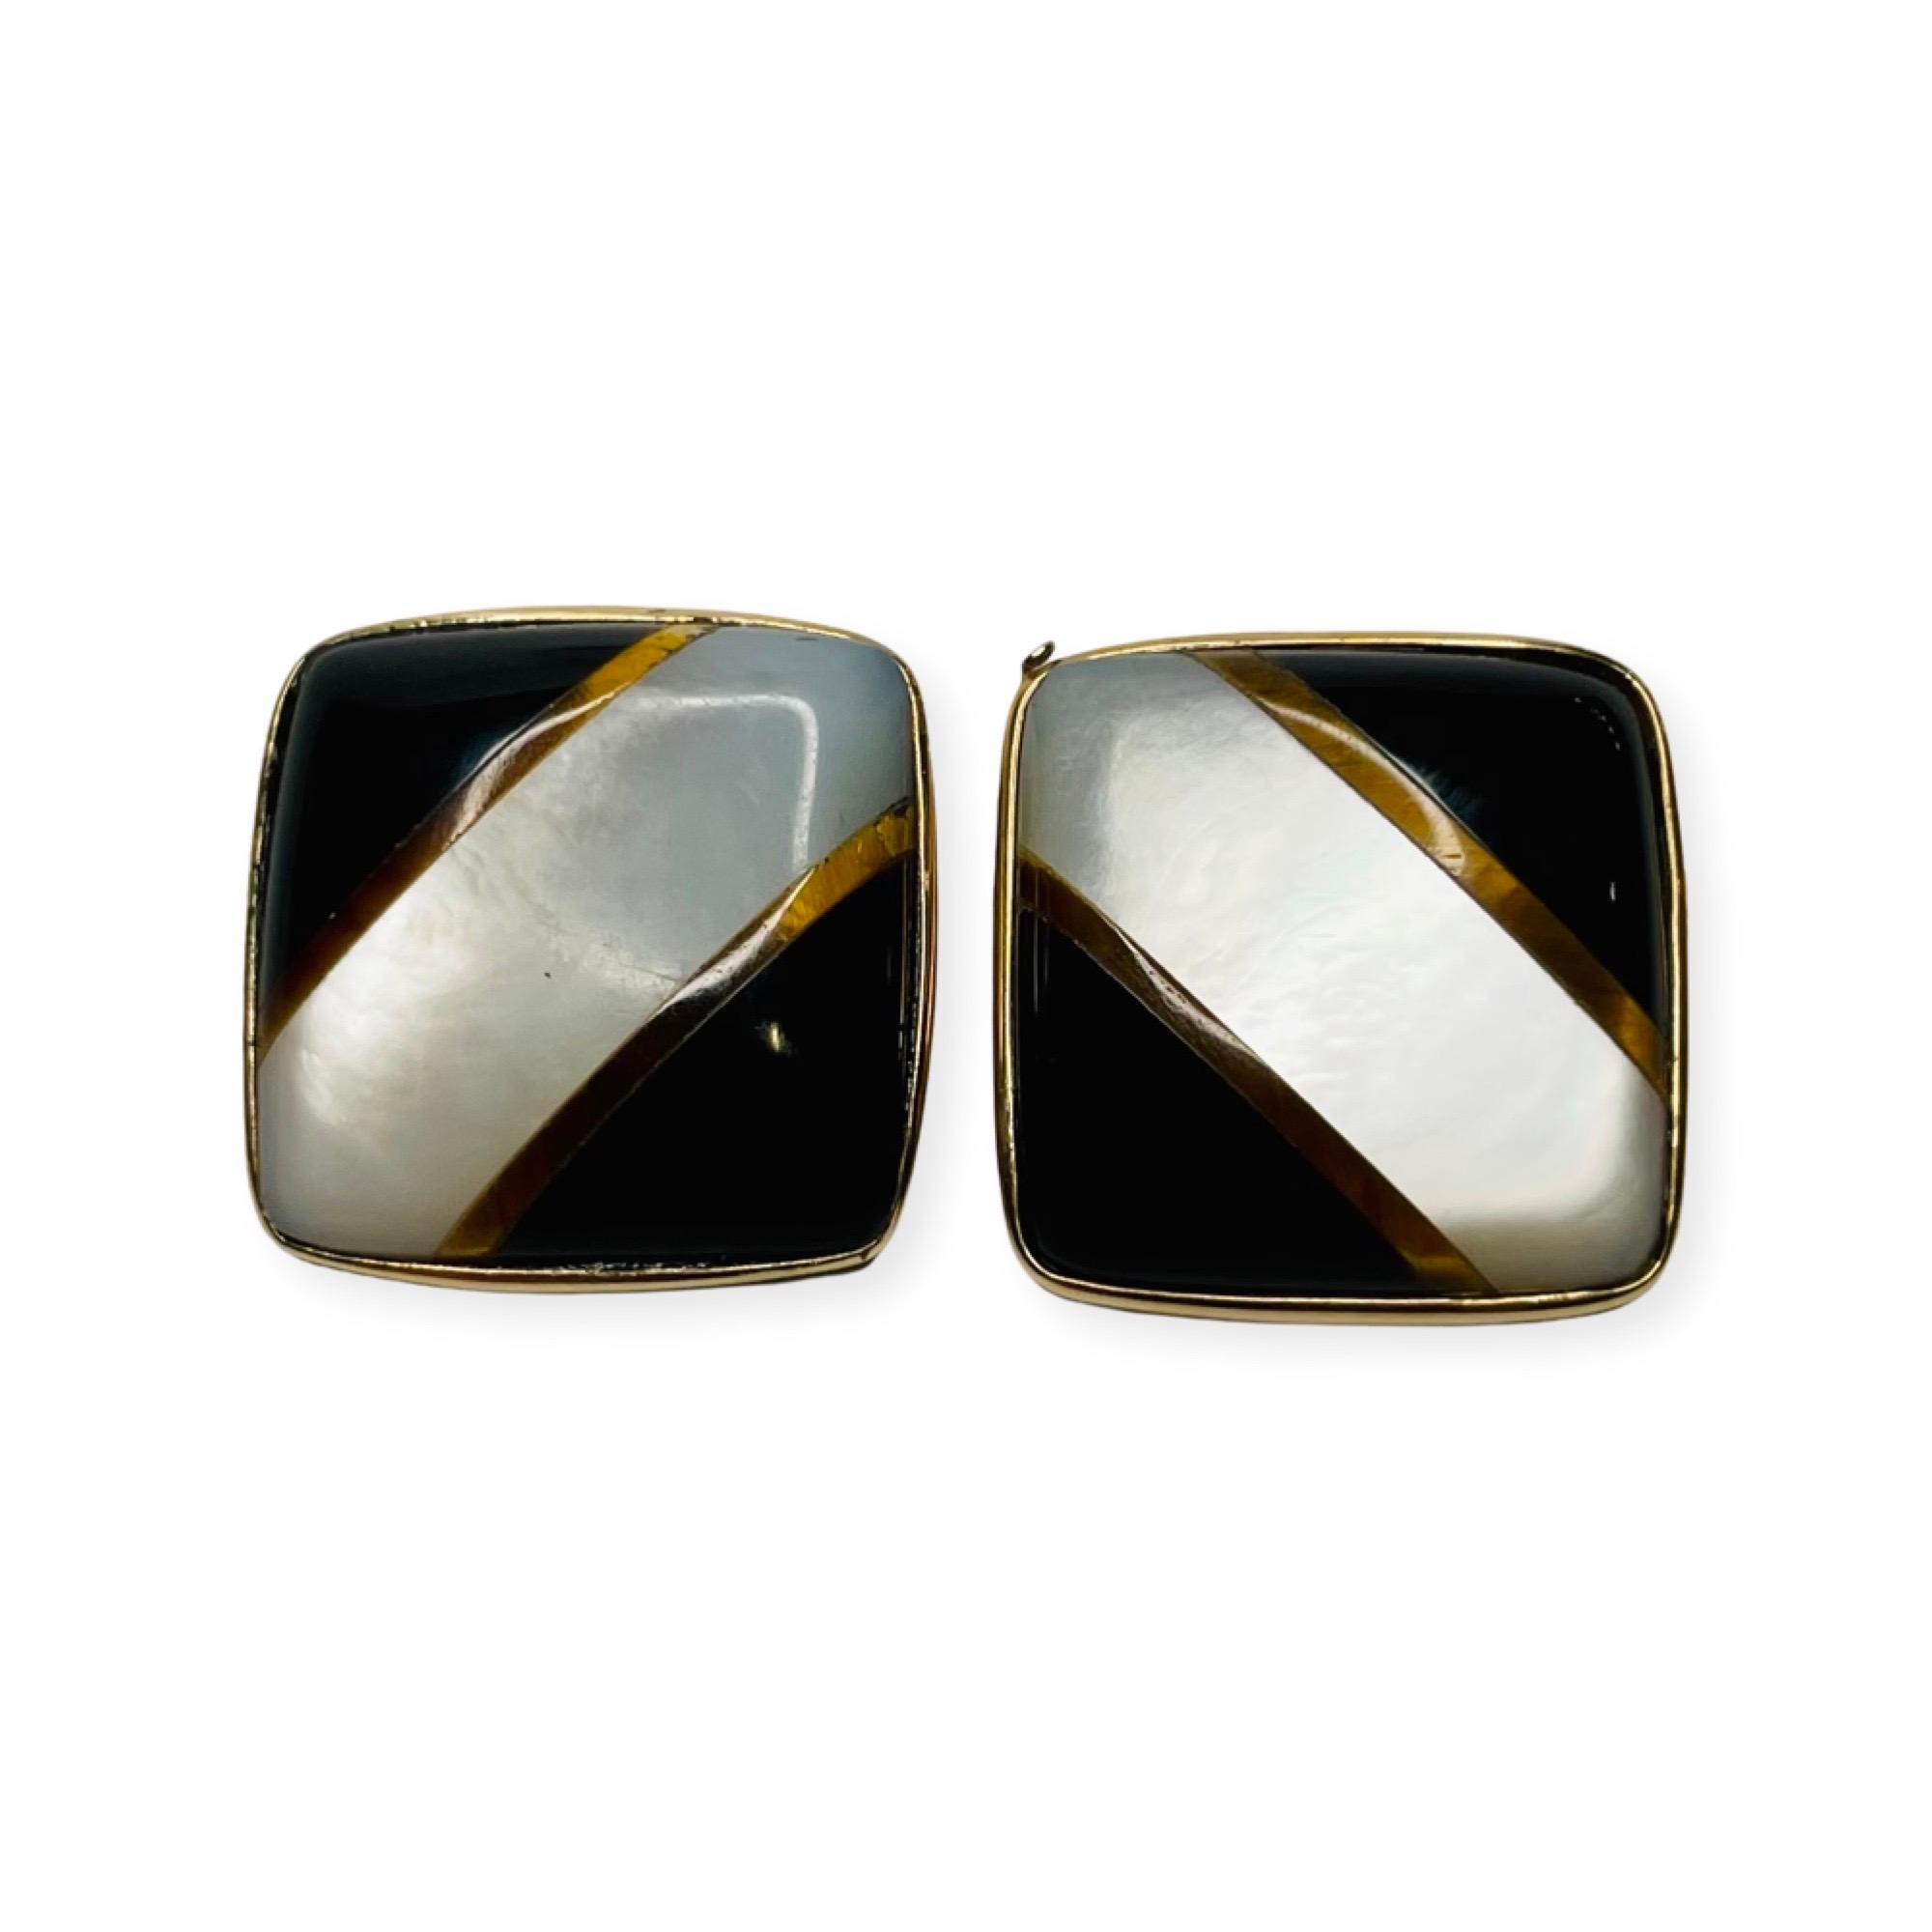 Lithos 18K Yellow Gold Inlaid Onyx and Mother of Pearl Earrings. They measure 19.0 mm X 18.58 mm. There have strips of 18K yellow gold in between the inlaid onyx and mother of pearl.  They are bezel set. The earrings have posts and earring backs. 